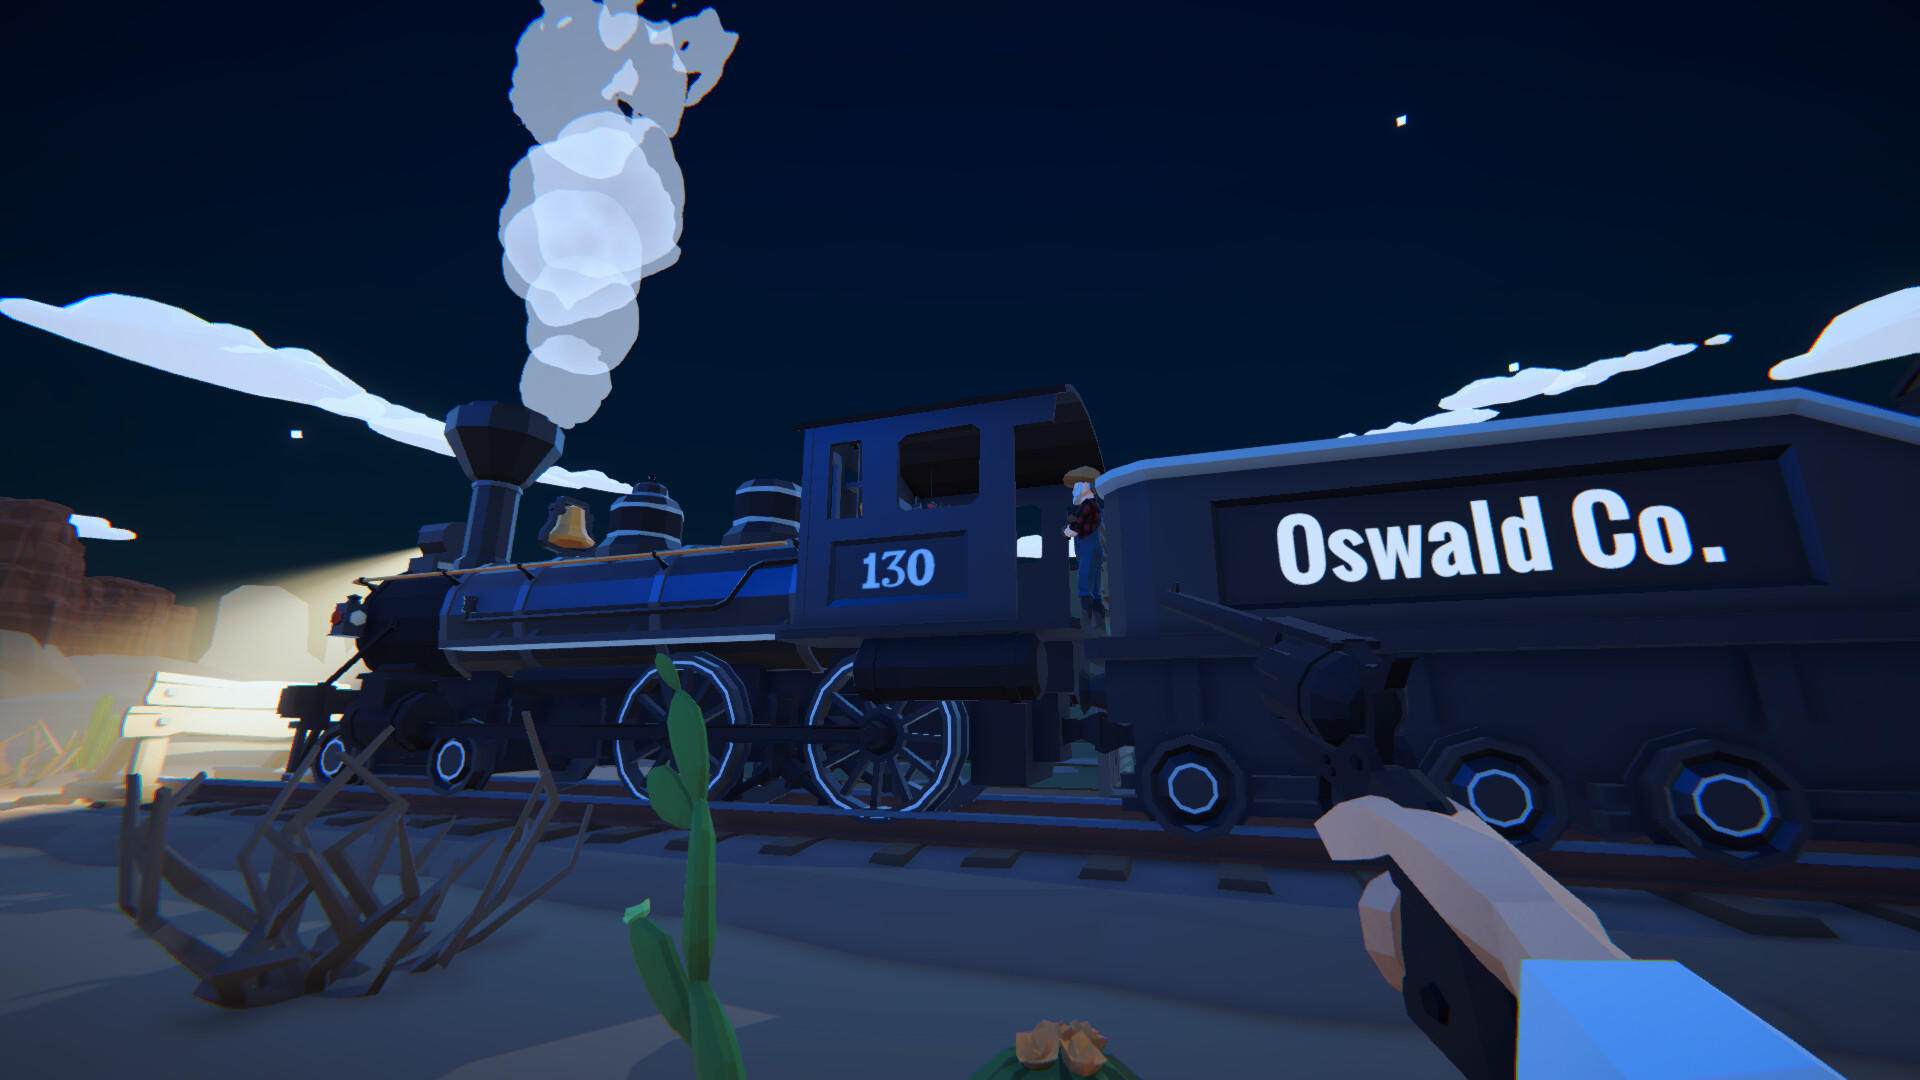 Screenshot of Iron Trails: Outlaw Pursuit